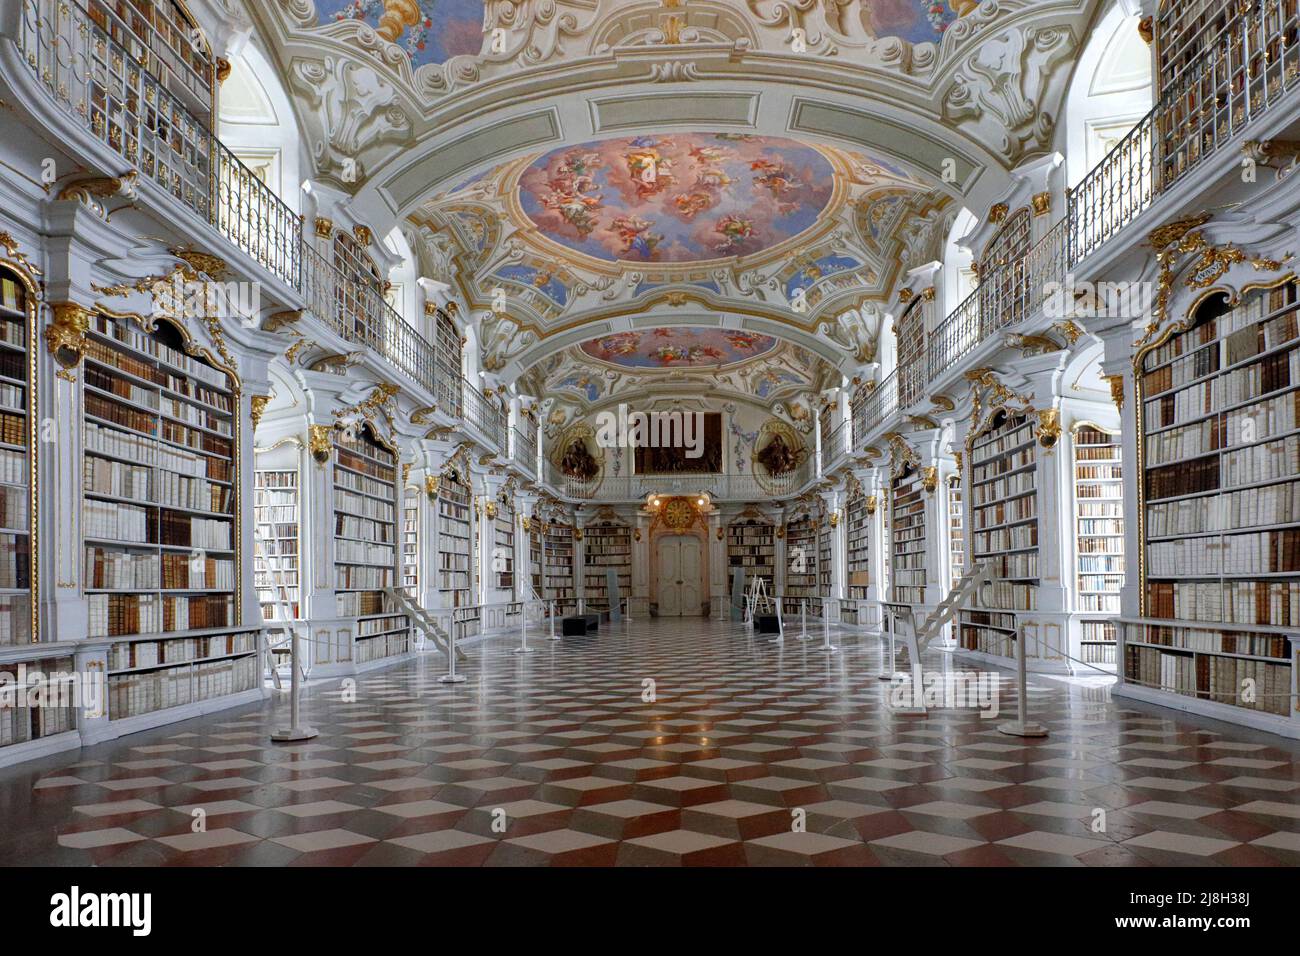 The gorgeous and artistic monastery library of Admont, Styria, Austria Stock Photo